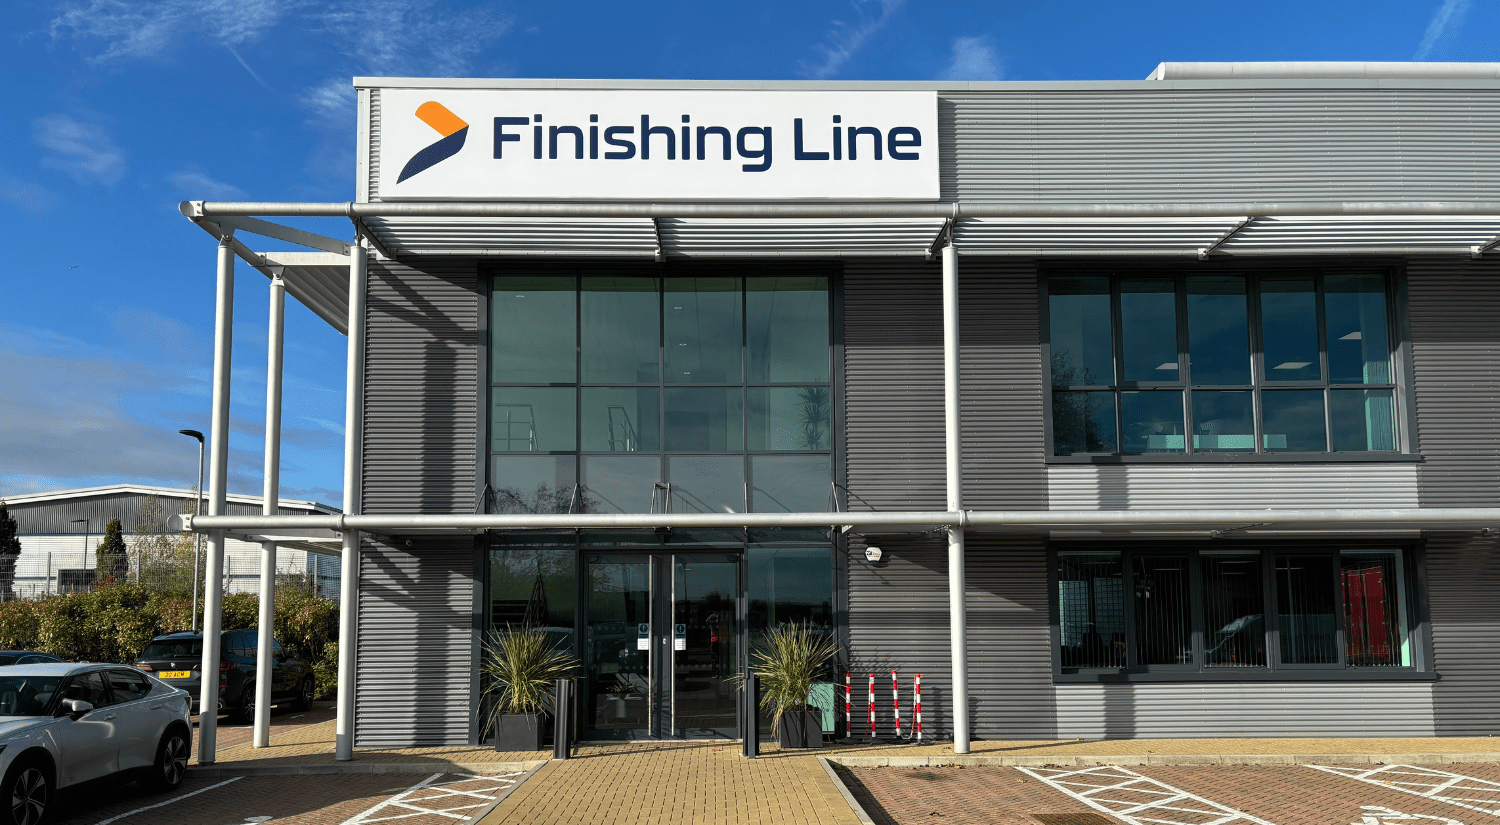 The Finishing Line's offices